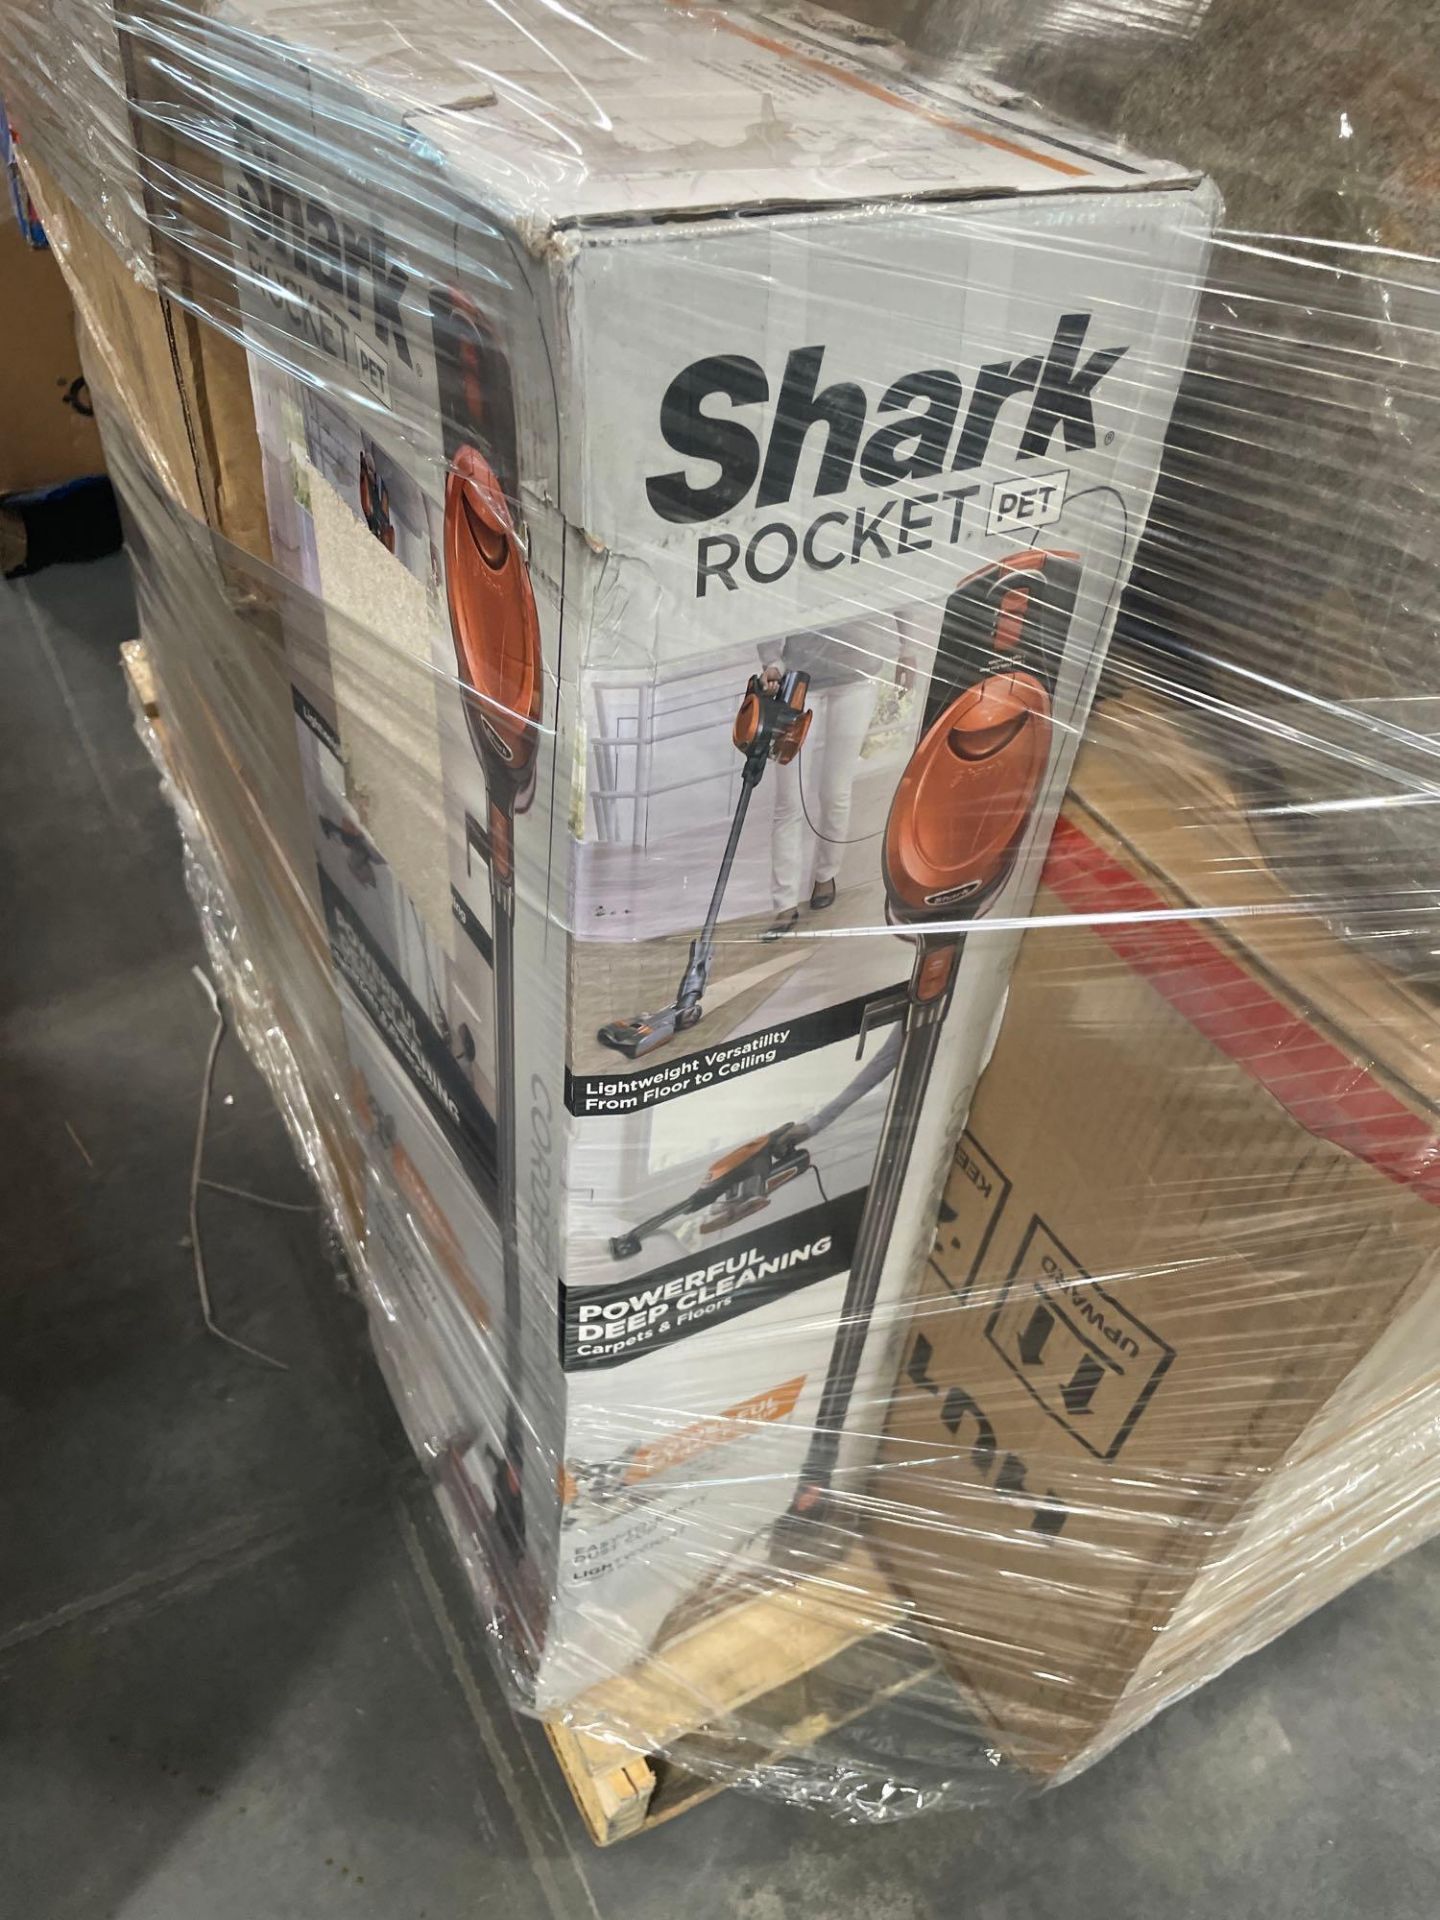 Shark Rocket Pet and more - Image 6 of 18